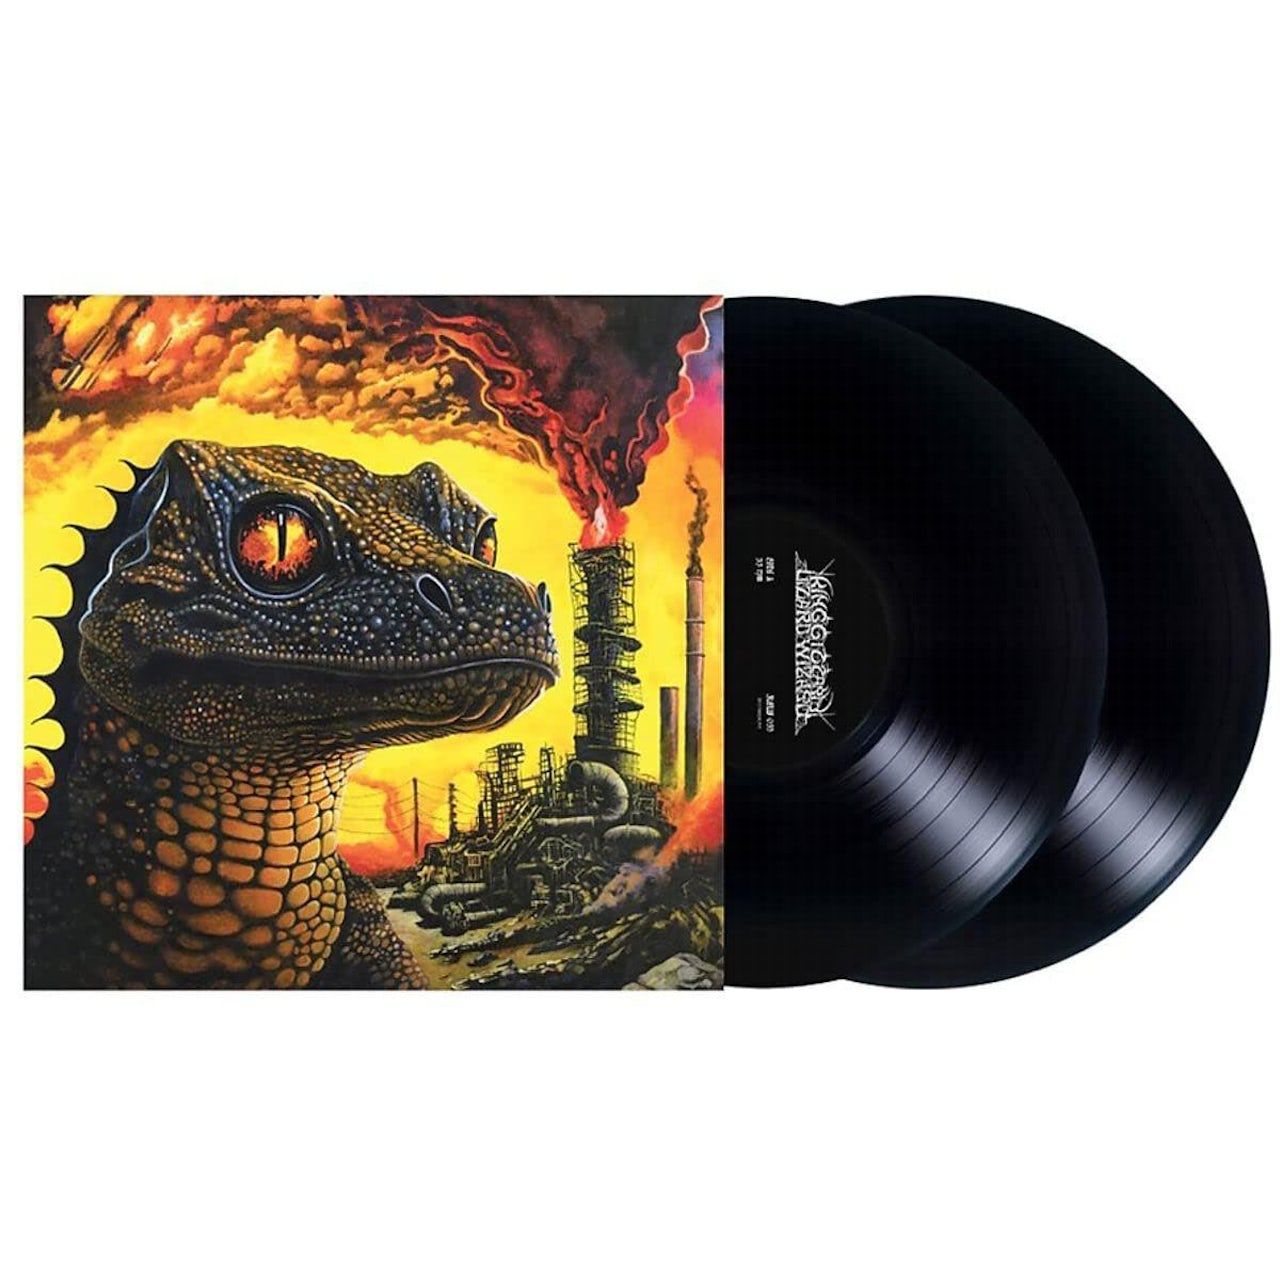 0842812189524, Виниловая пластинка King Gizzard & The Lizard Wizard, Petrodragonic Apocalypse; Or, Dawn Of Eternal Night: An Annihilation Of Planet Earth And The Beginning Of Merciless Damnation (coloured) king gizzard and the lizard wizard виниловая пластинка king gizzard and the lizard wizard live in asheville ‘19